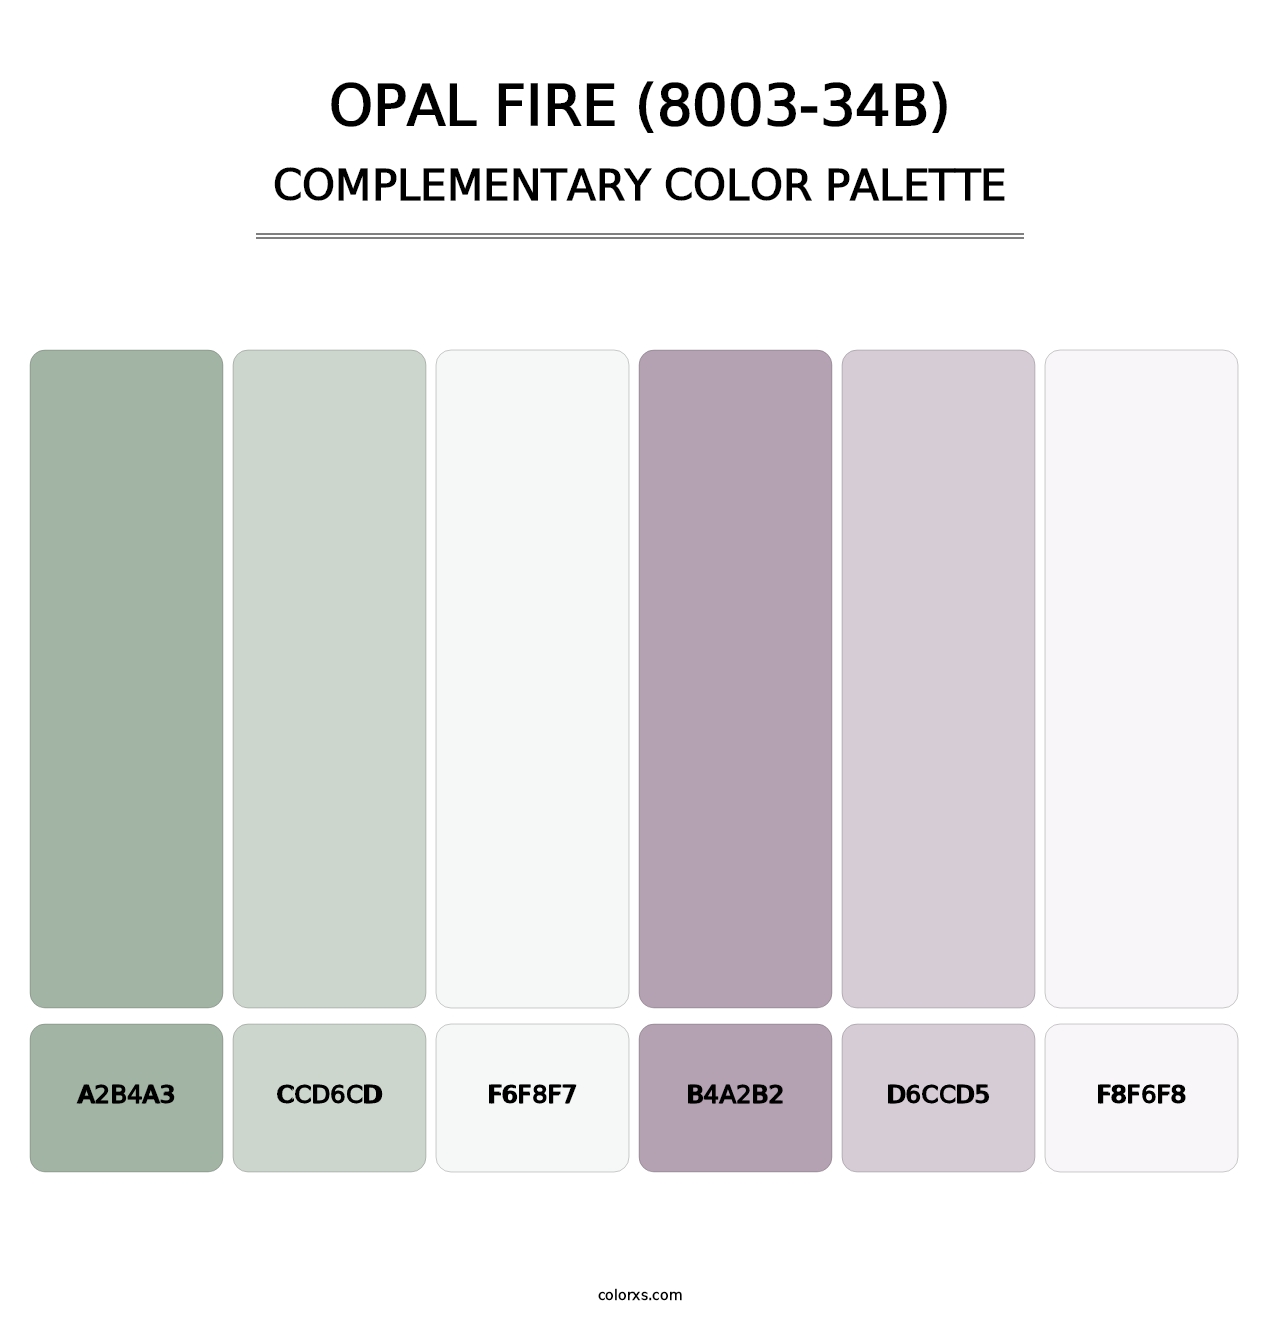 Opal Fire (8003-34B) - Complementary Color Palette